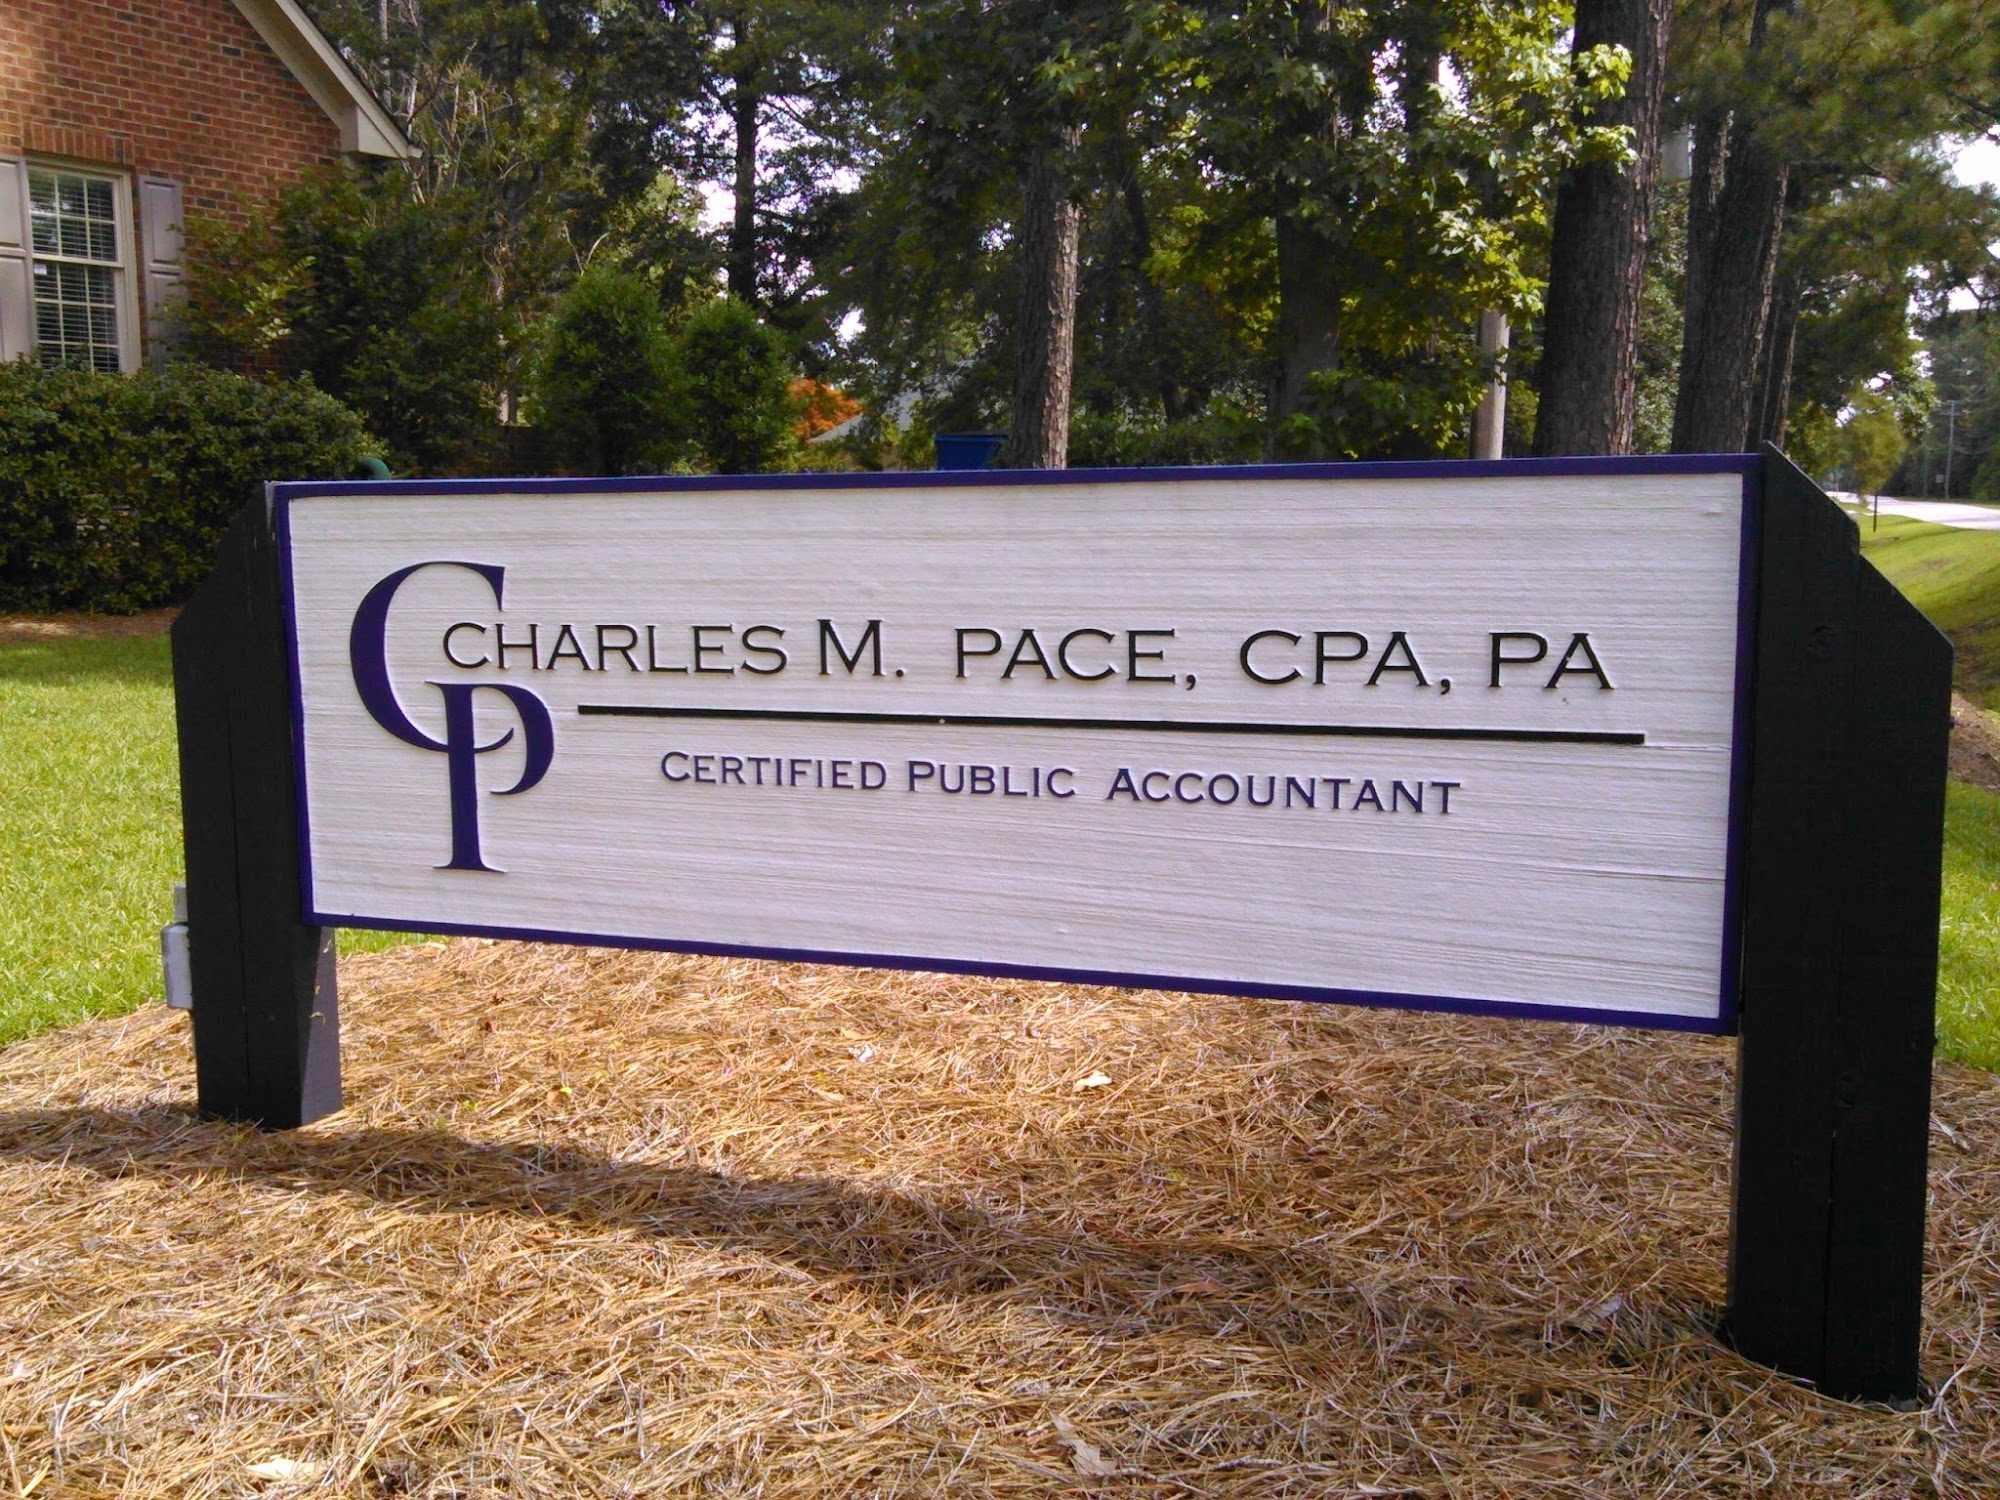 Charles M. Pace, CPA, PA